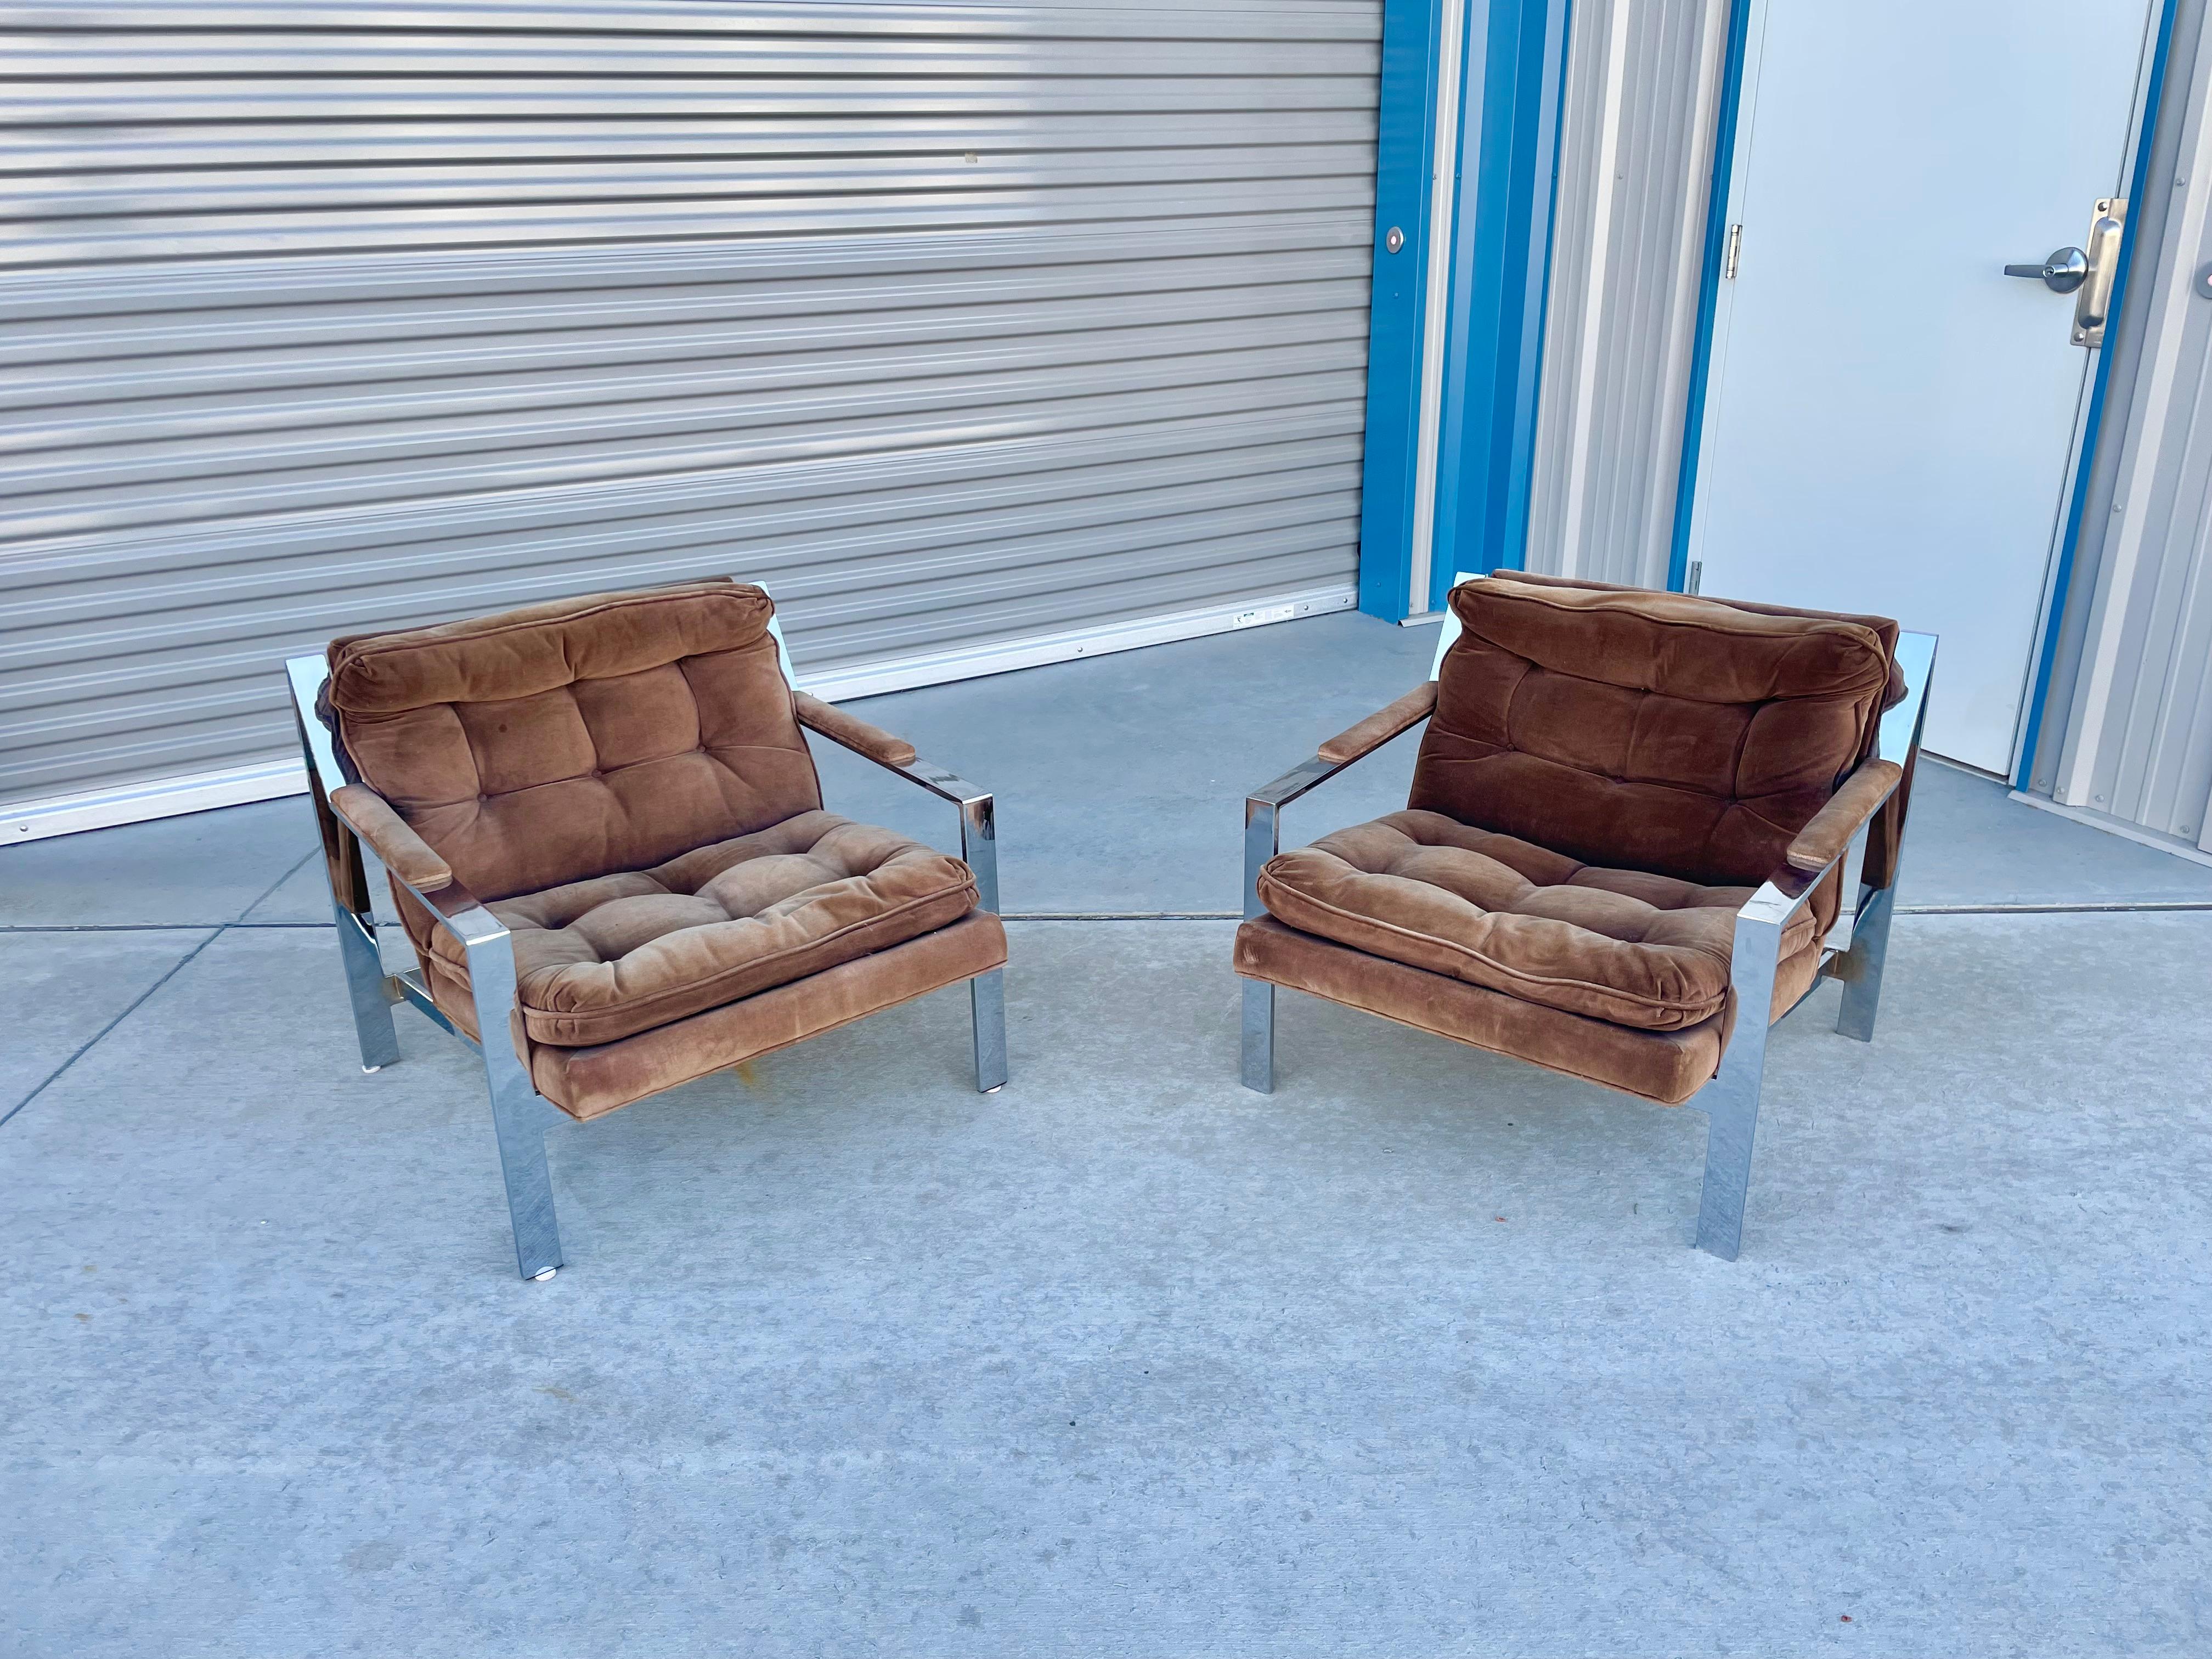 Stunning pair of vintage chrome lounge chairs designed by Cy Mann manufactured in the United States, circa 1970s. The chairs feature a fully chromed frame that stands out for its elegant architecture and sleek design. These chairs are also very